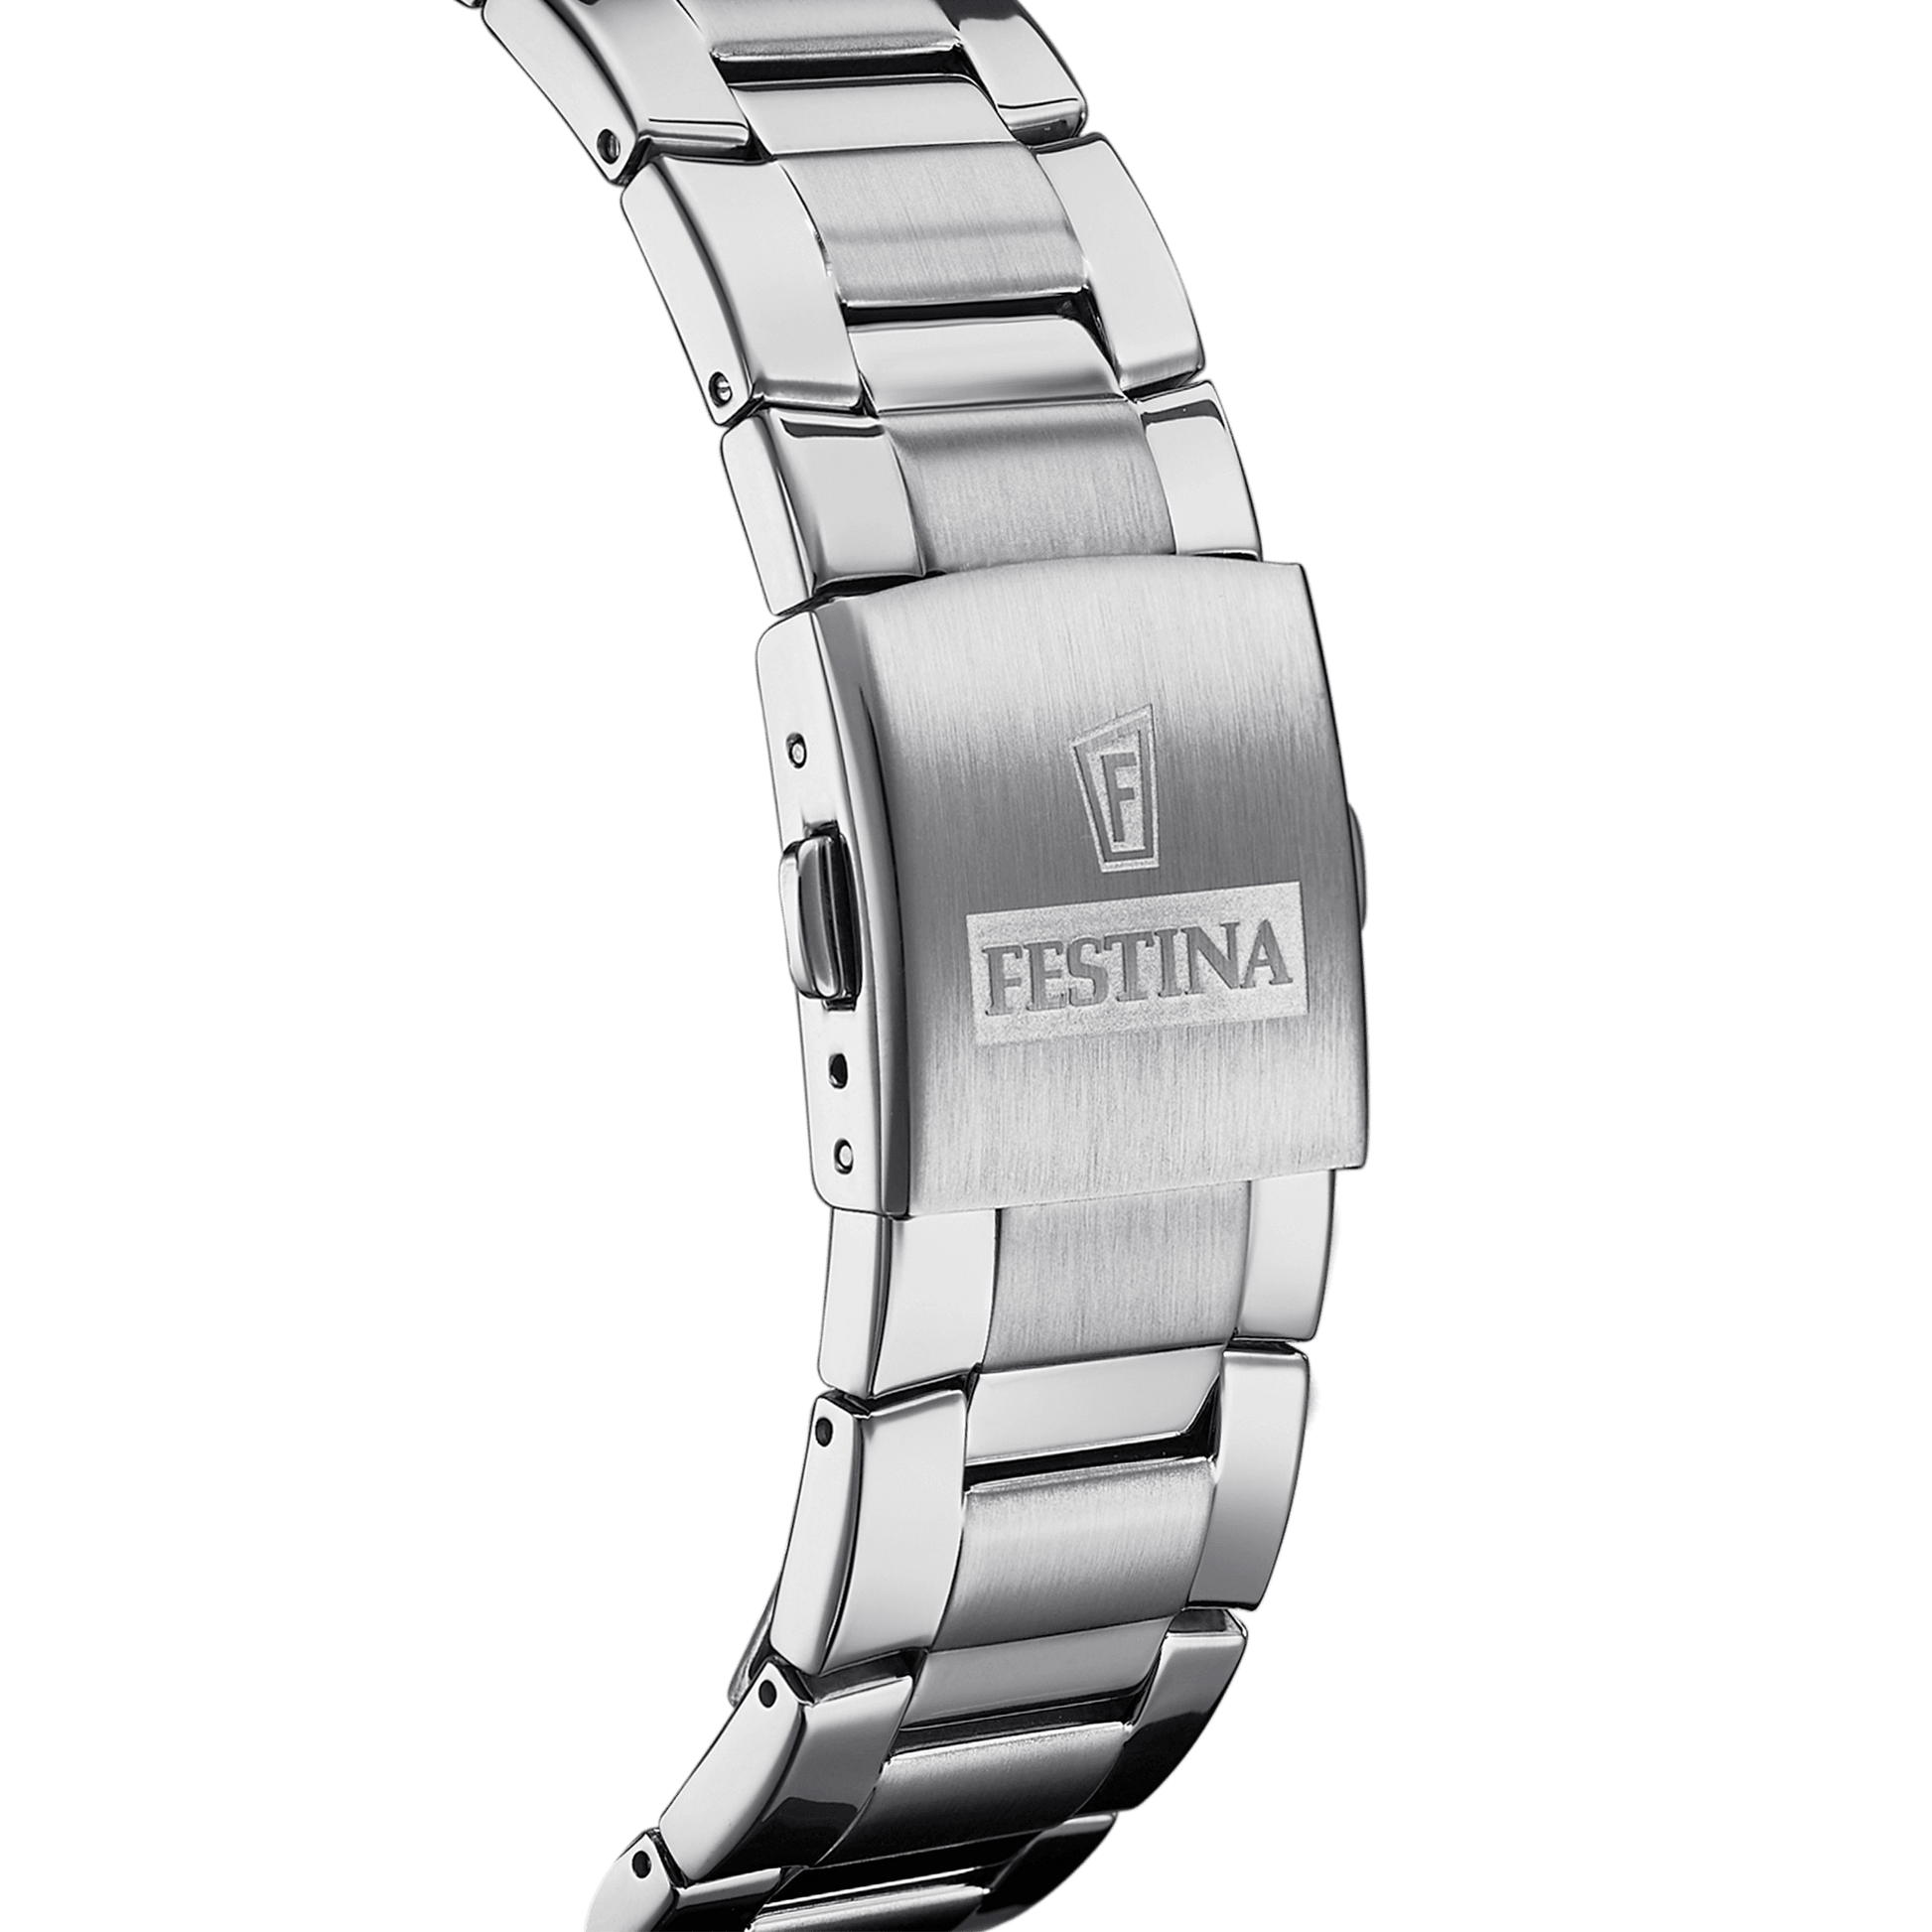 Chrono Sport F20463-1 | Water Resistance 100m/330ft - Strap Material Stainless Steel - Size 46 mm / Free shipping, 2 years warranty & 30 Days Return | Festina Watches USA